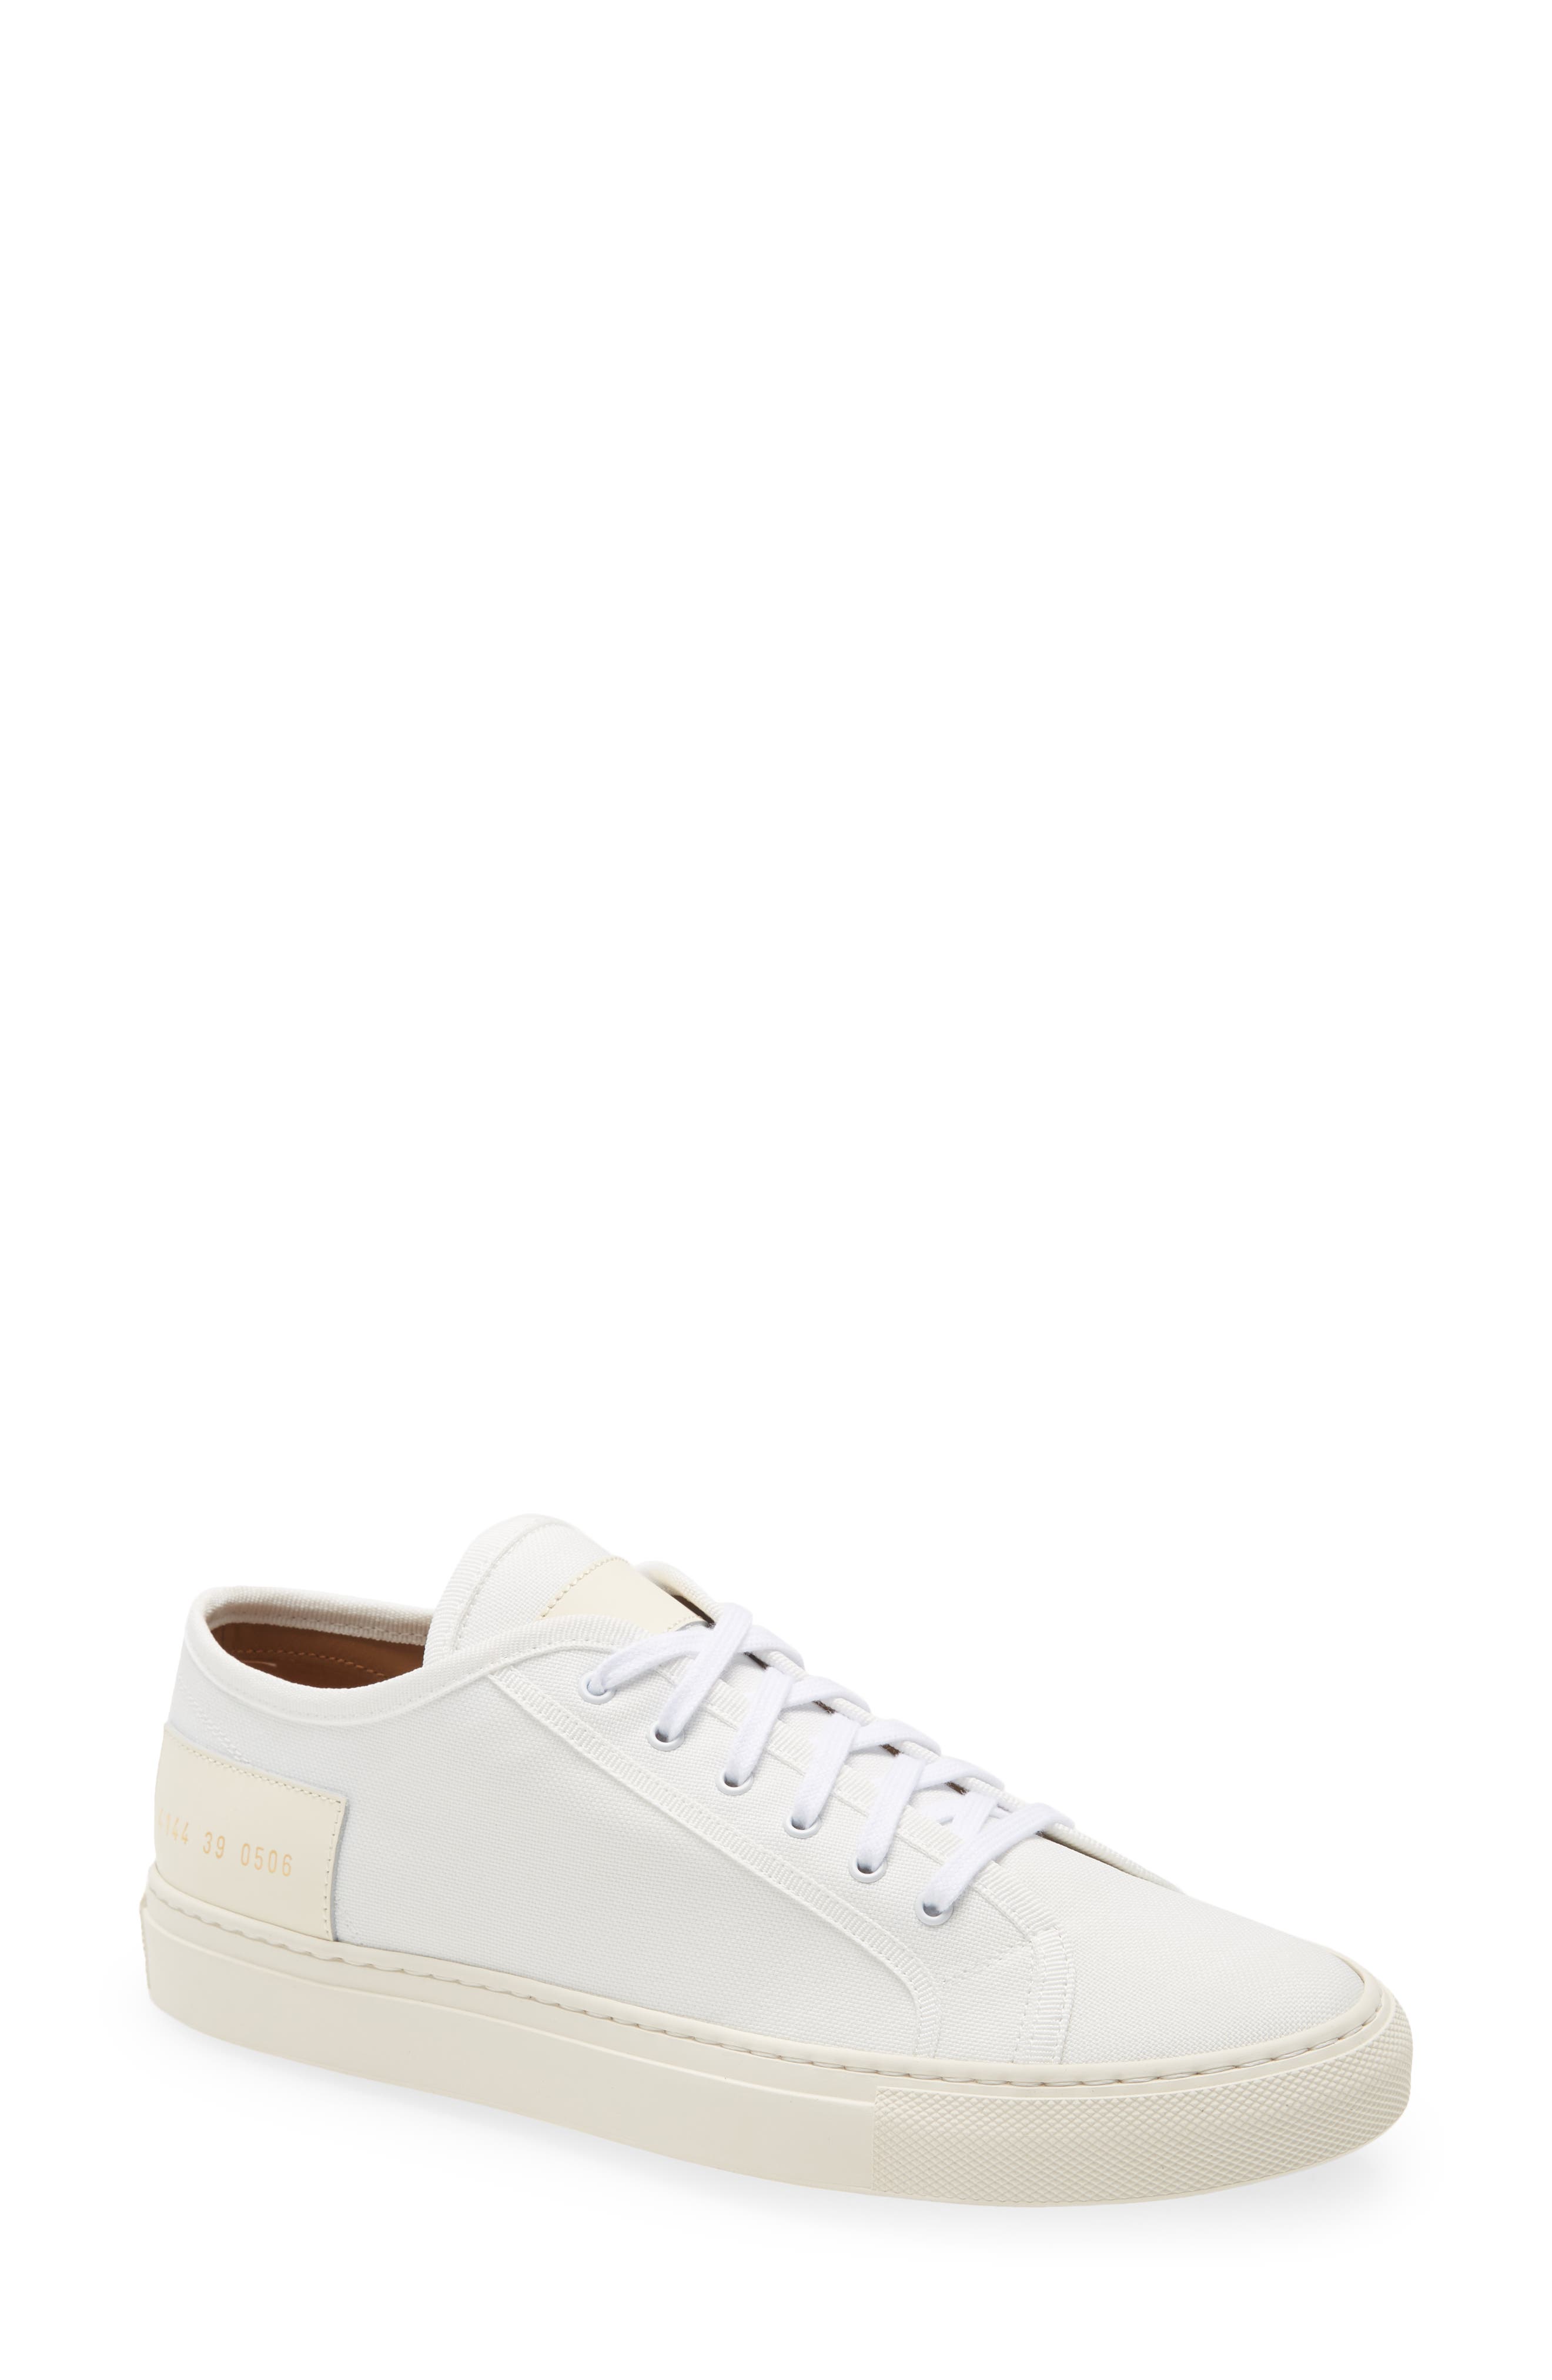 Common Projects Tournament Low Recycled Nylon Sneaker in White/Natural at Nordstrom, Size 5Us